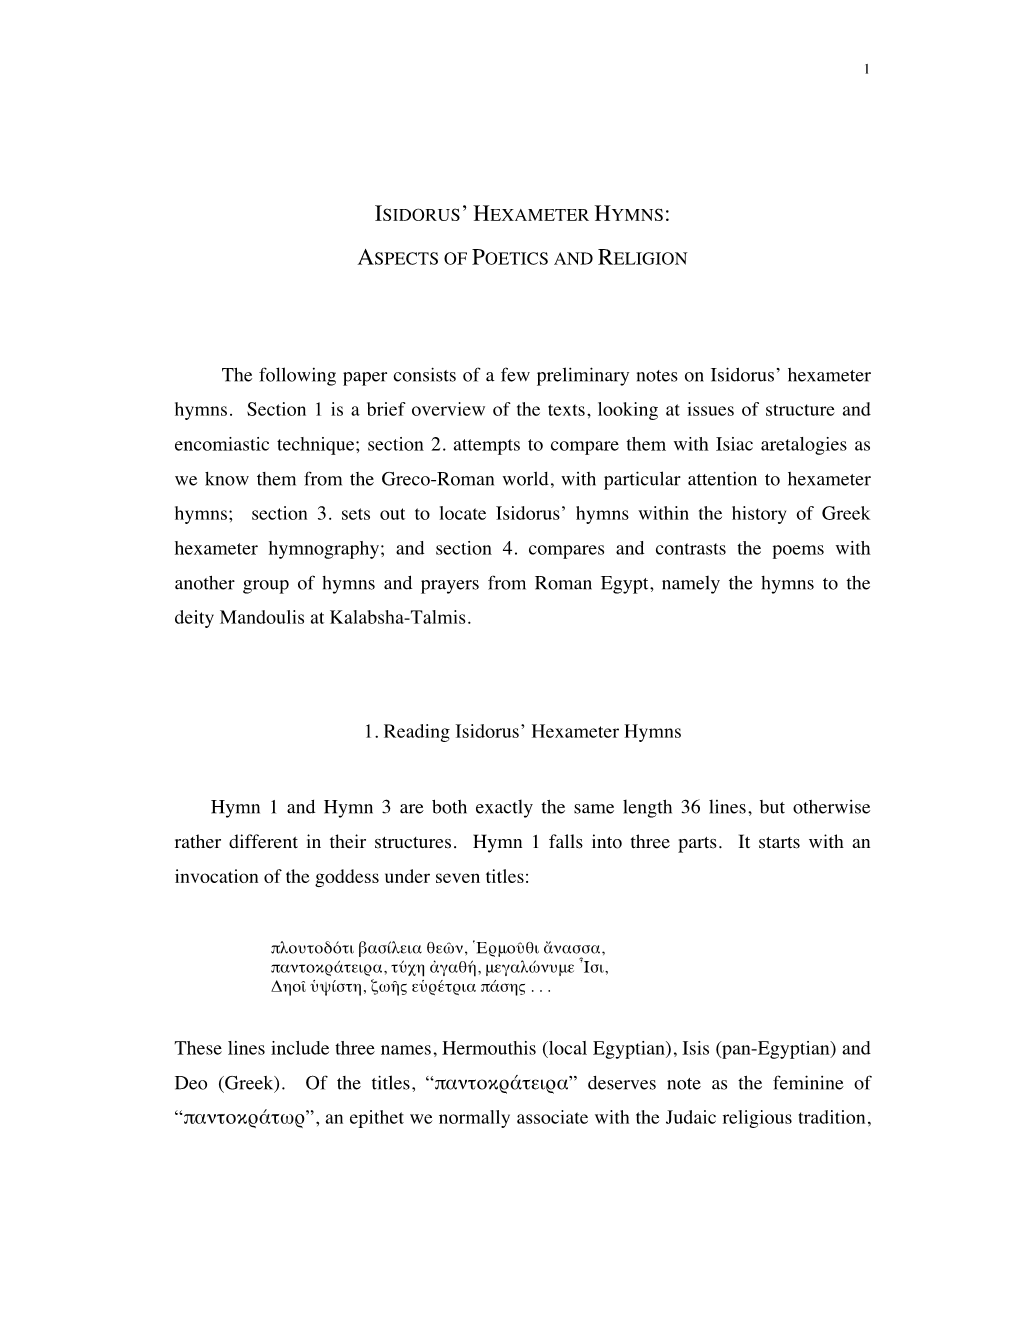 The Following Paper Consists of a Few Preliminary Notes on Isidorus' Hexameter Hymns. Section 1 Is a Brief Overview of the Te